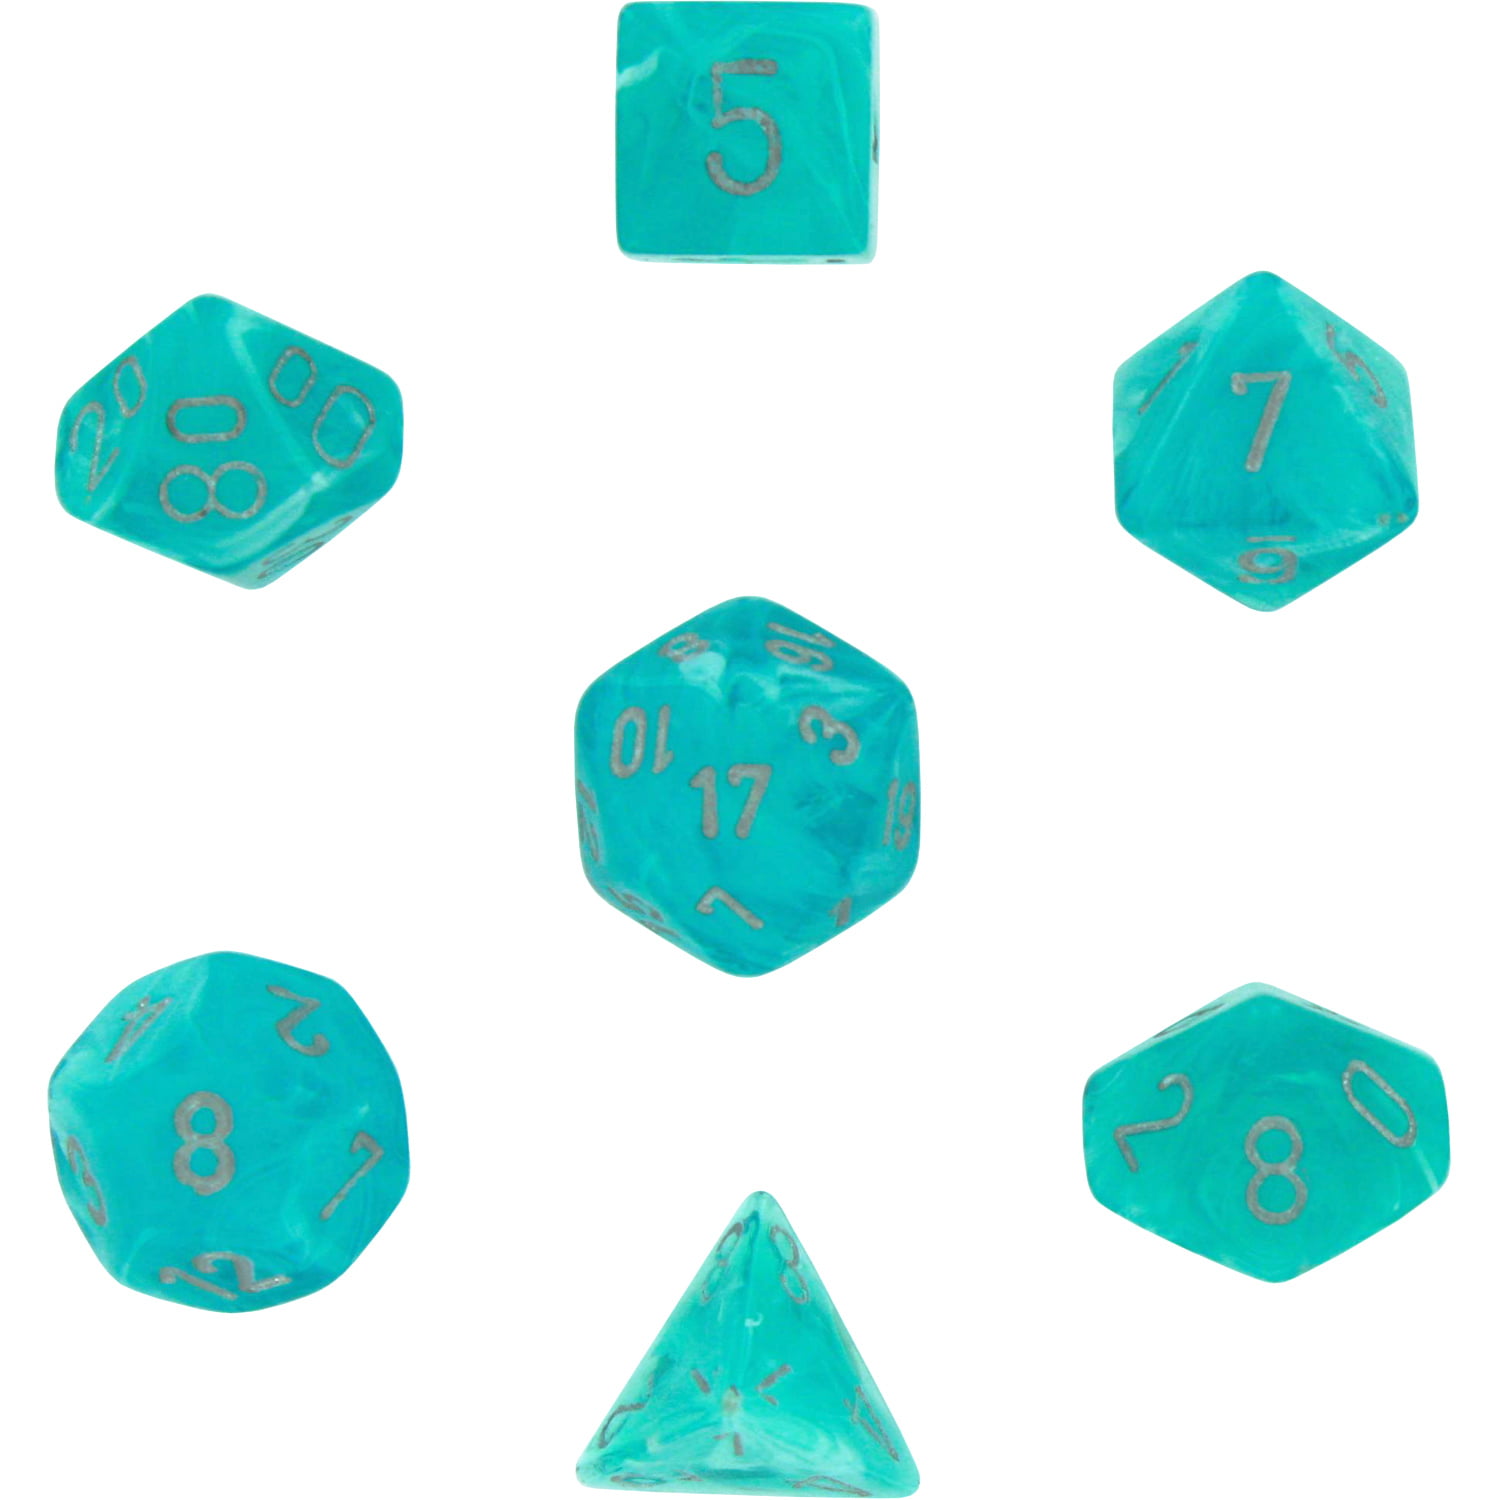 Polyhedral Dice Cirrus Aqua W/silver 7 Set Chessex Manufacturing Chx27465 for sale online 